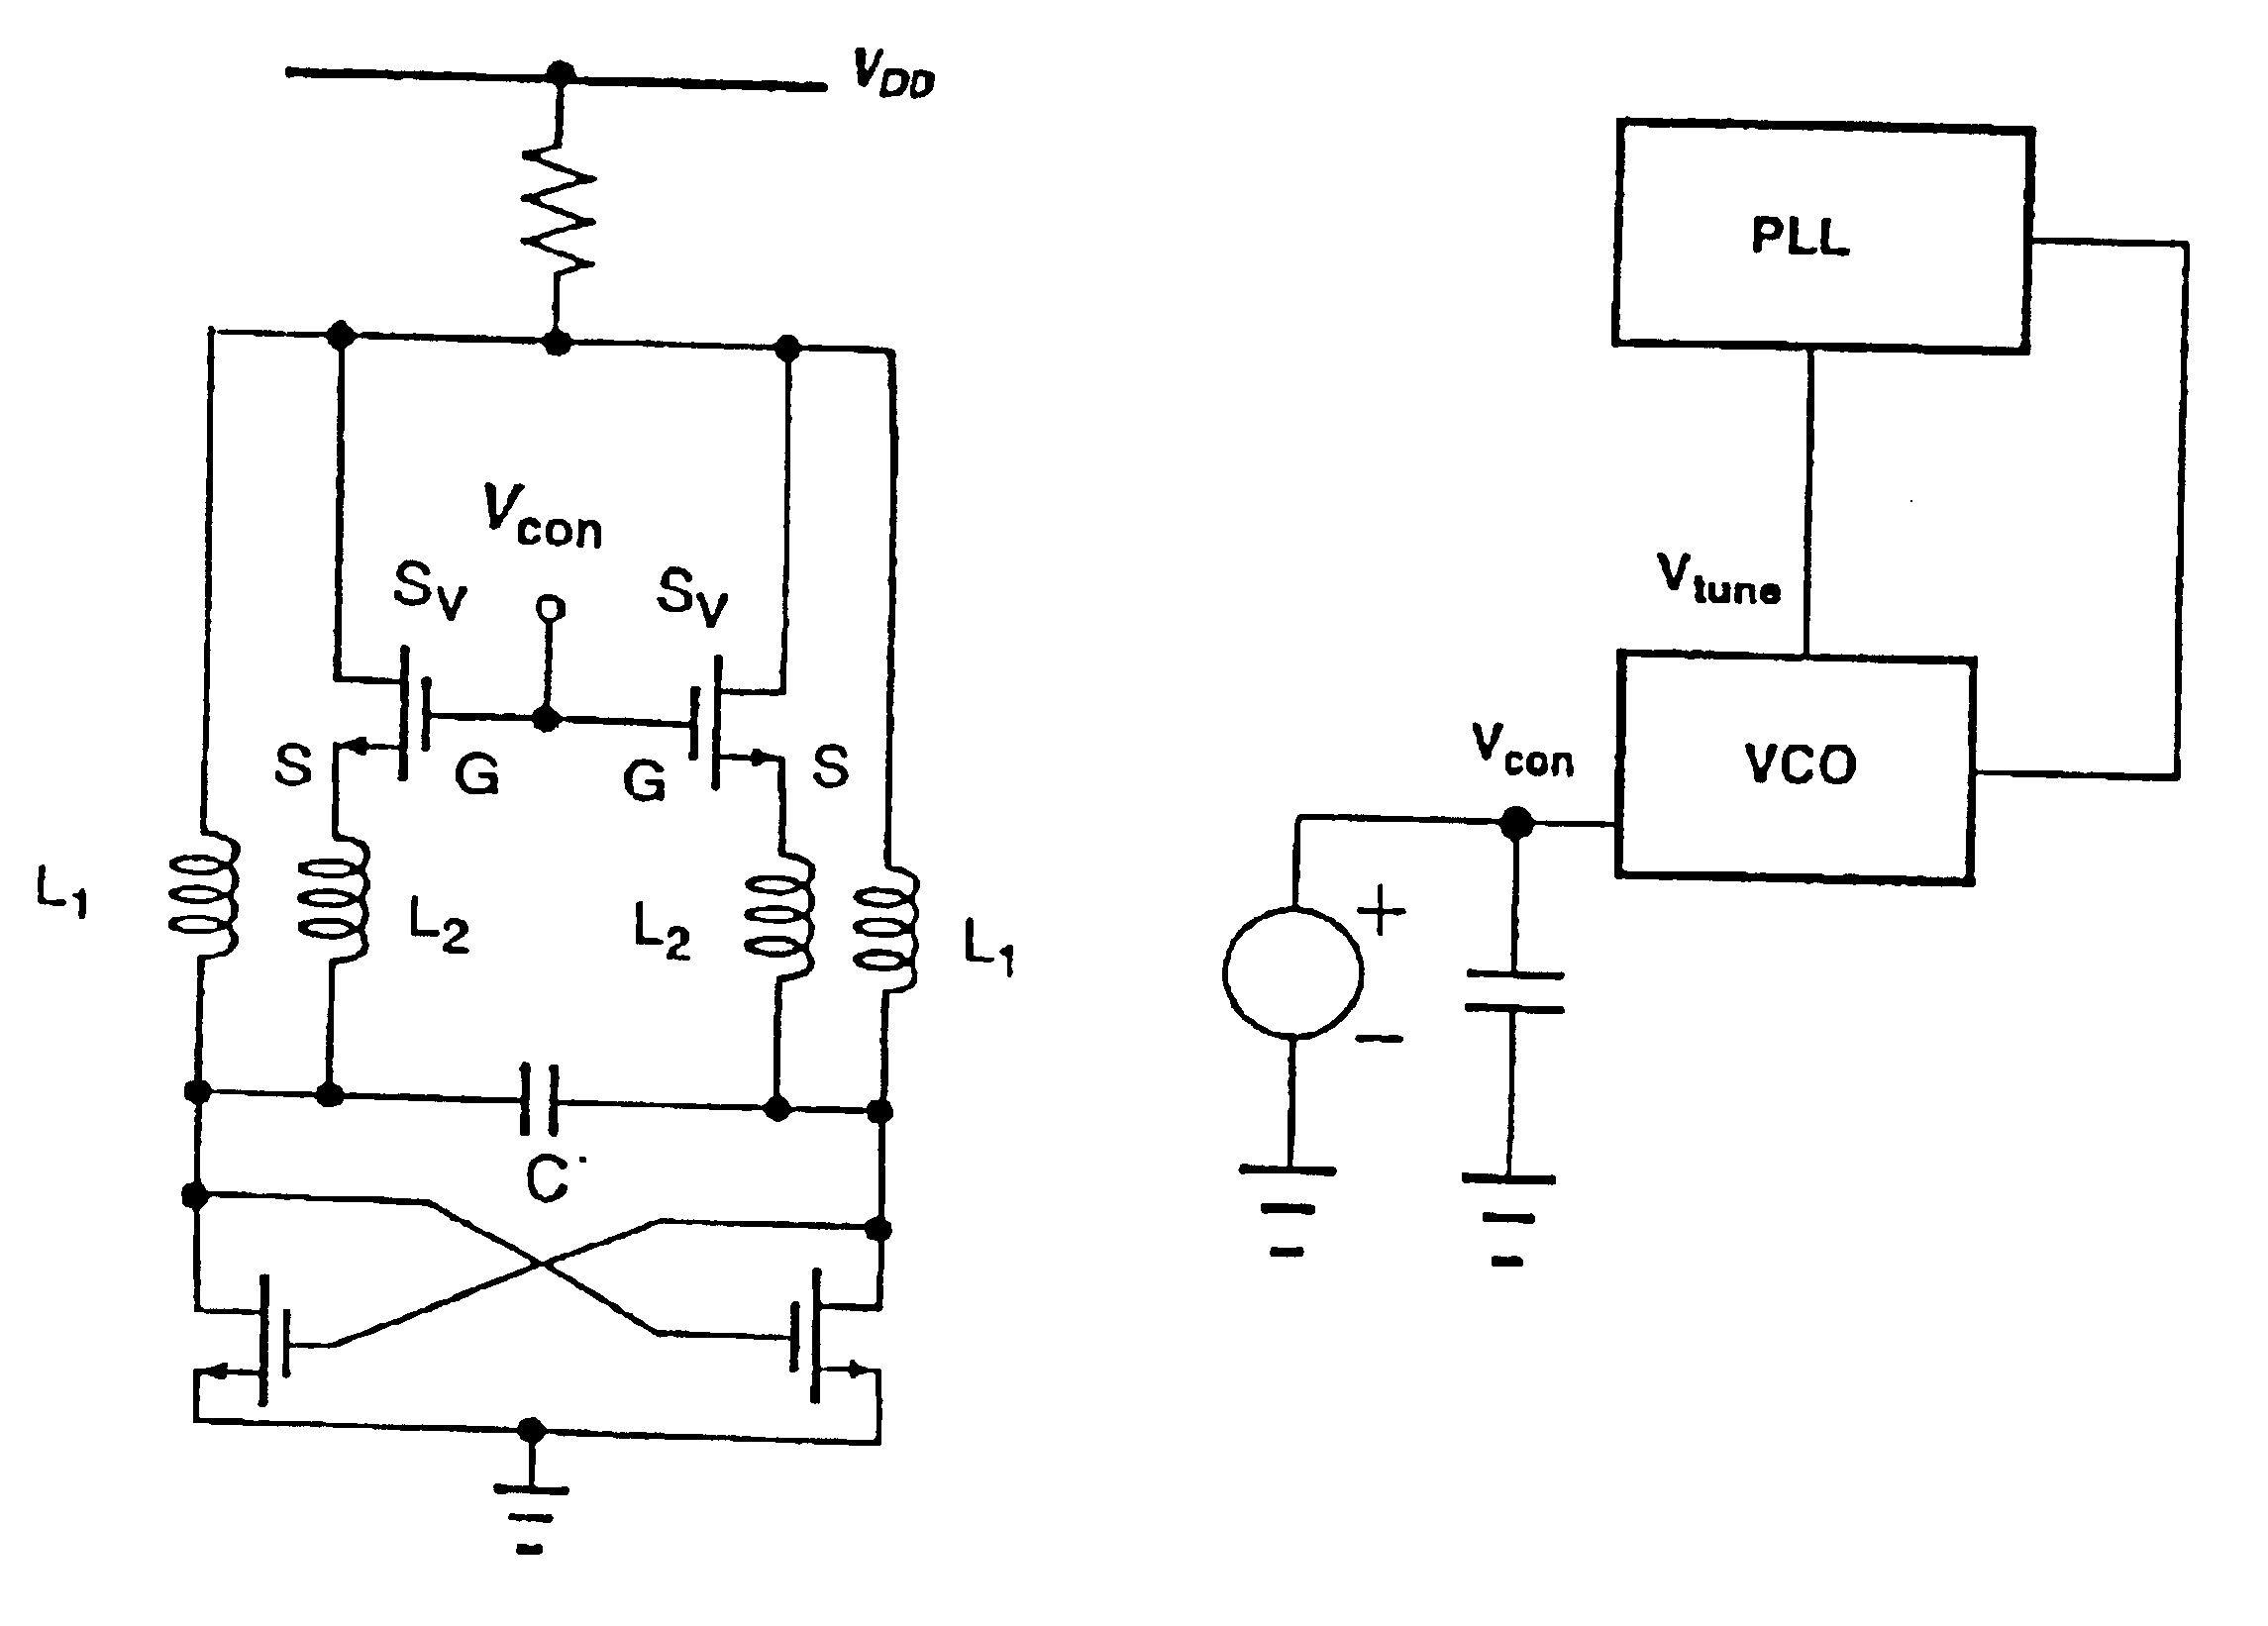 Voltage-controlled oscillator with LC resonant circuit